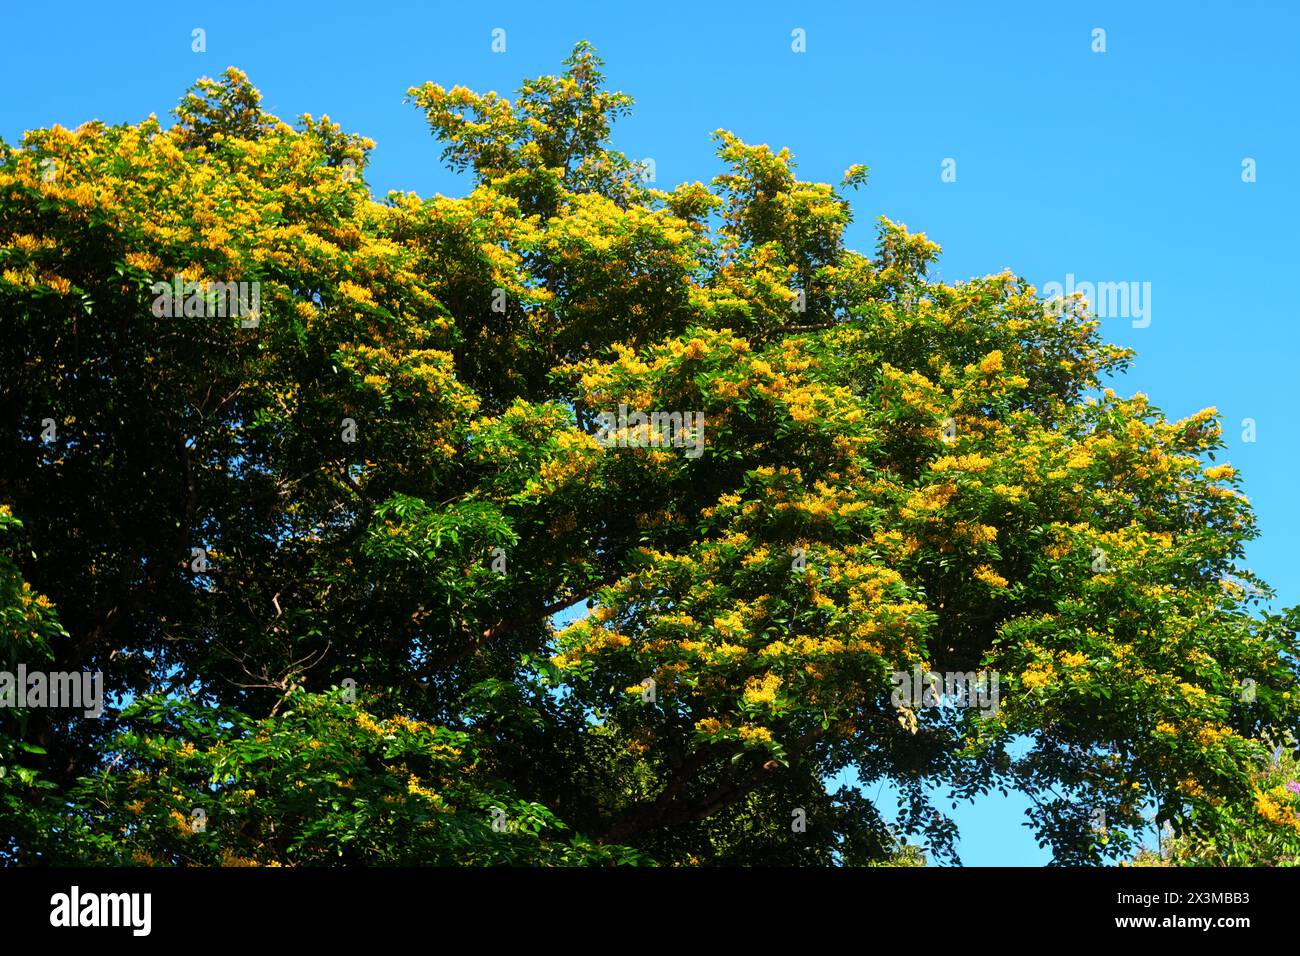 Flowering narra tree or Pterocarpus indicus tropical tree in Philippines. Stock Photo